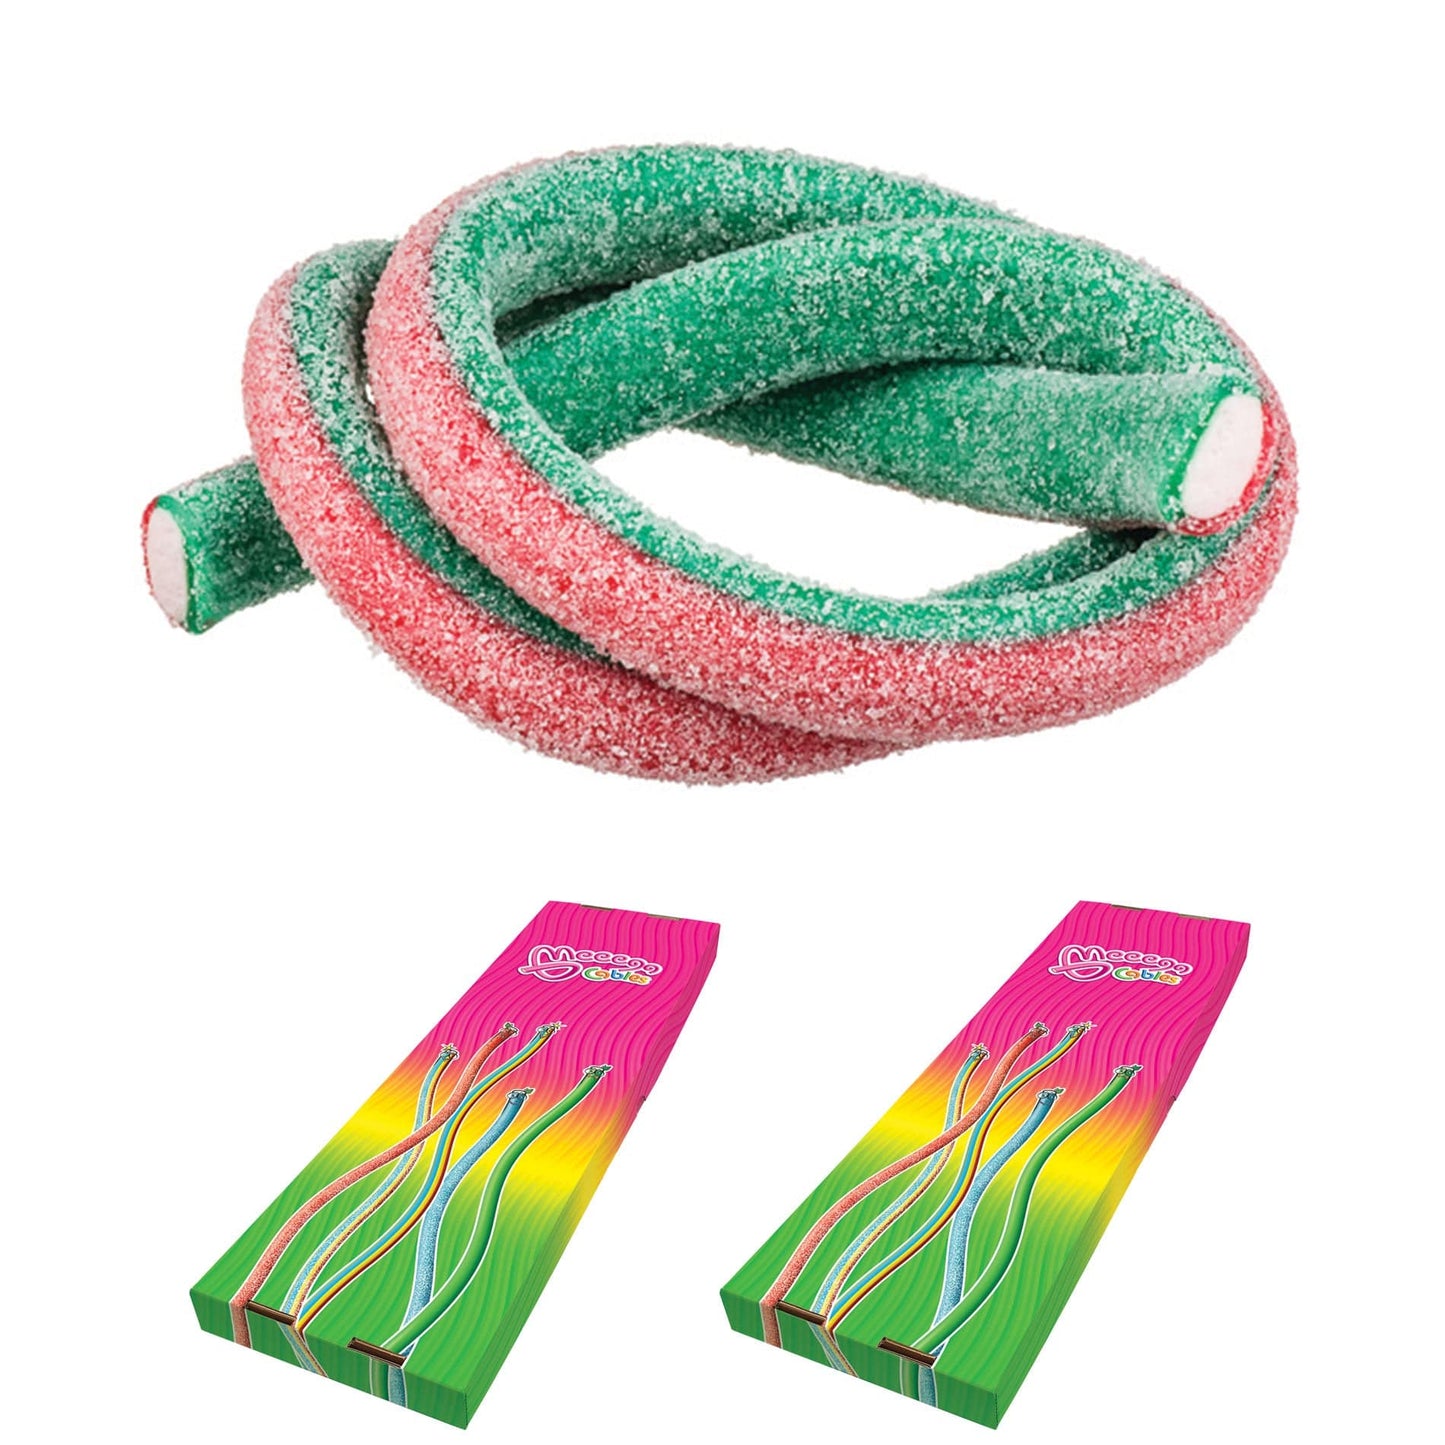 Novelty Concessions Gummy Rope SOUR WATERMELON STRAWBERRY / 2 Pack (60 pieces) Meeega Cables European Chewy Rope Candy - Box of 30 individually wrapped Meeega Cables, each over 2-feet long cups with lids and straws